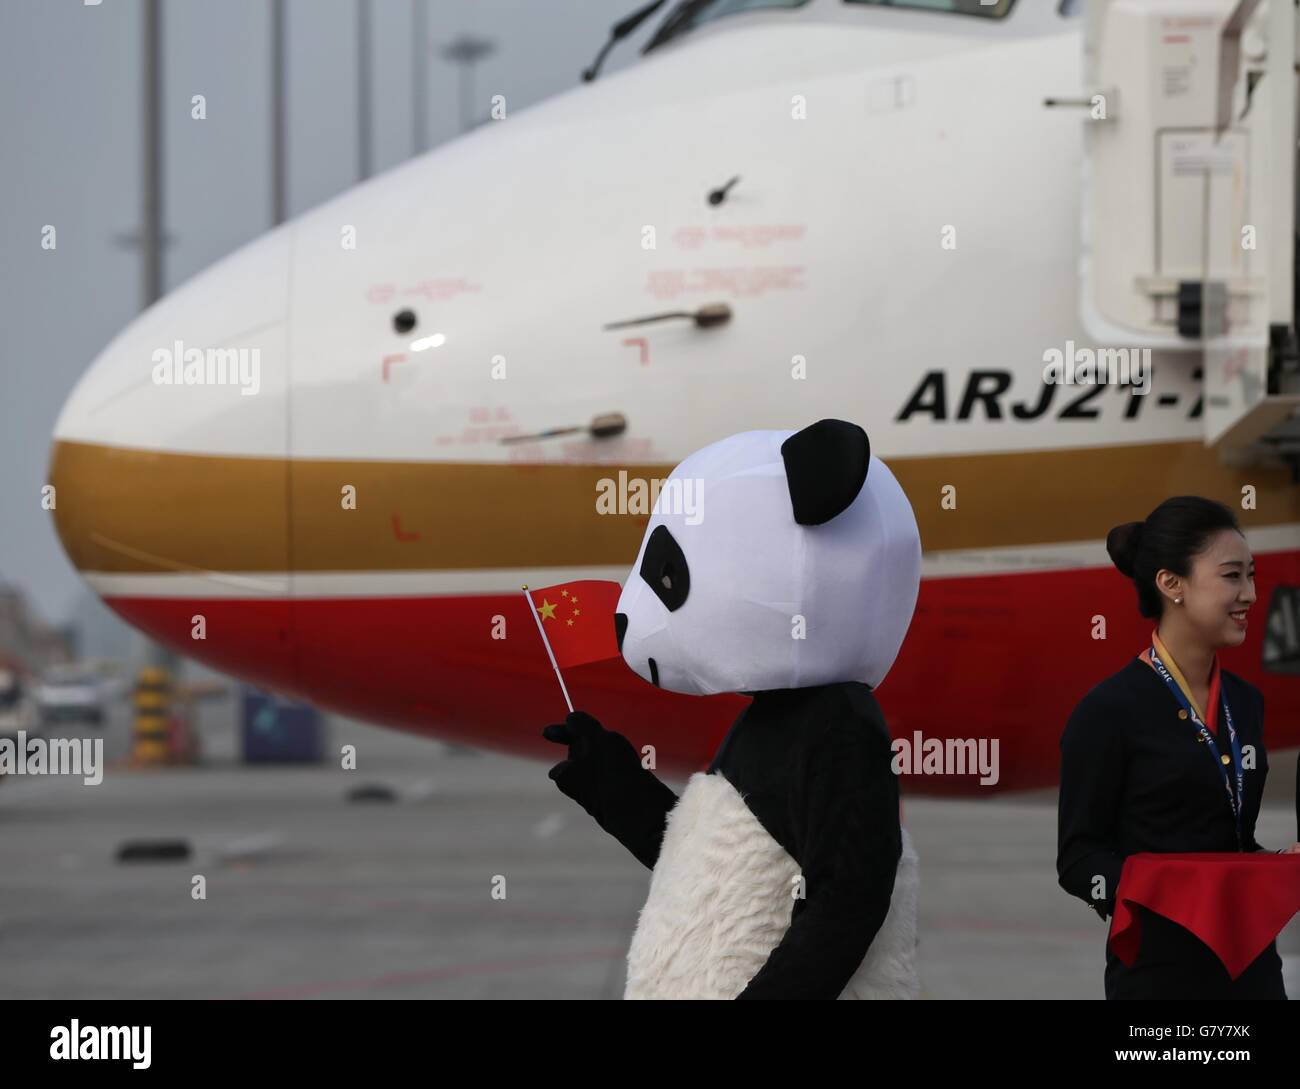 Chengdu, China's Sichuan Province. 28th June, 2016. A panda mascot is seen in front of Chengdu Airlines ARJ21-700 at Shuangliu International Airport in Chengdu, capital of southwest China's Sichuan Province, June 28, 2016. ARJ21, manufactured by the Commercial Aircraft Corp. of China (COMAC), made its maiden commercial flight from Chengdu to Shanghai Tuesday. The domestically-designed airliner is China's first regional jet manufactured according to international standards. © Ding Ting/Xinhua/Alamy Live News Stock Photo